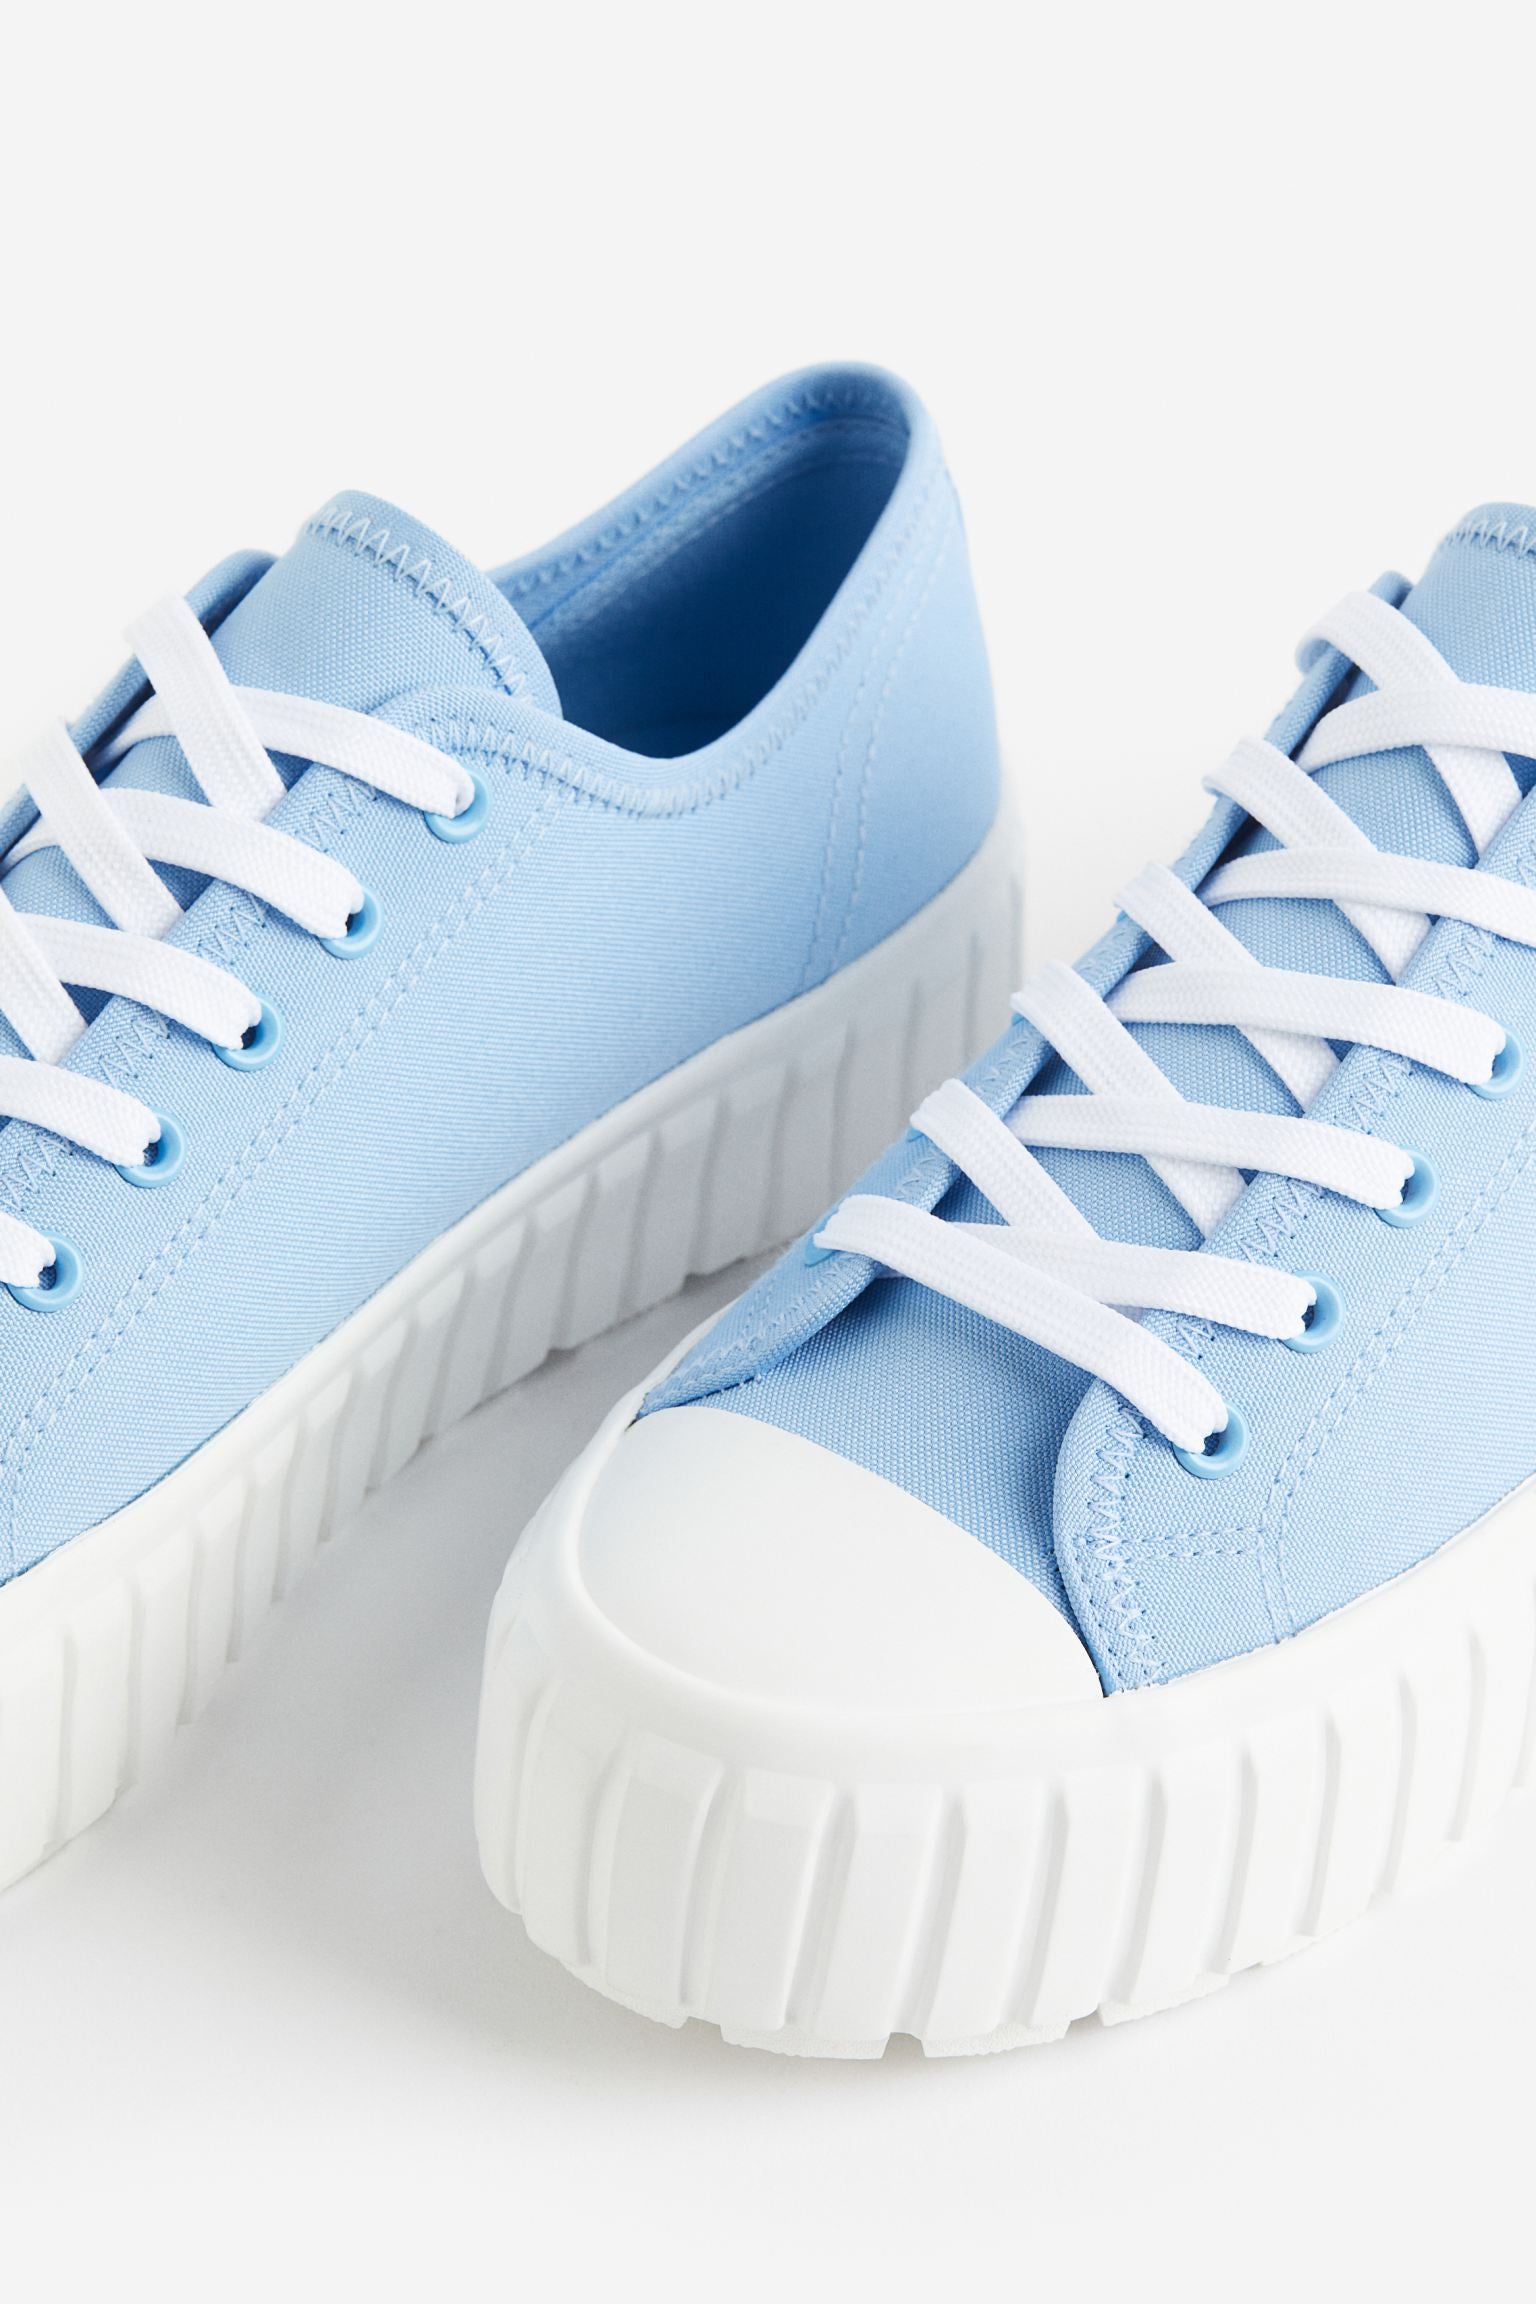 Sneakers - White/Leather - Men | H&M AU